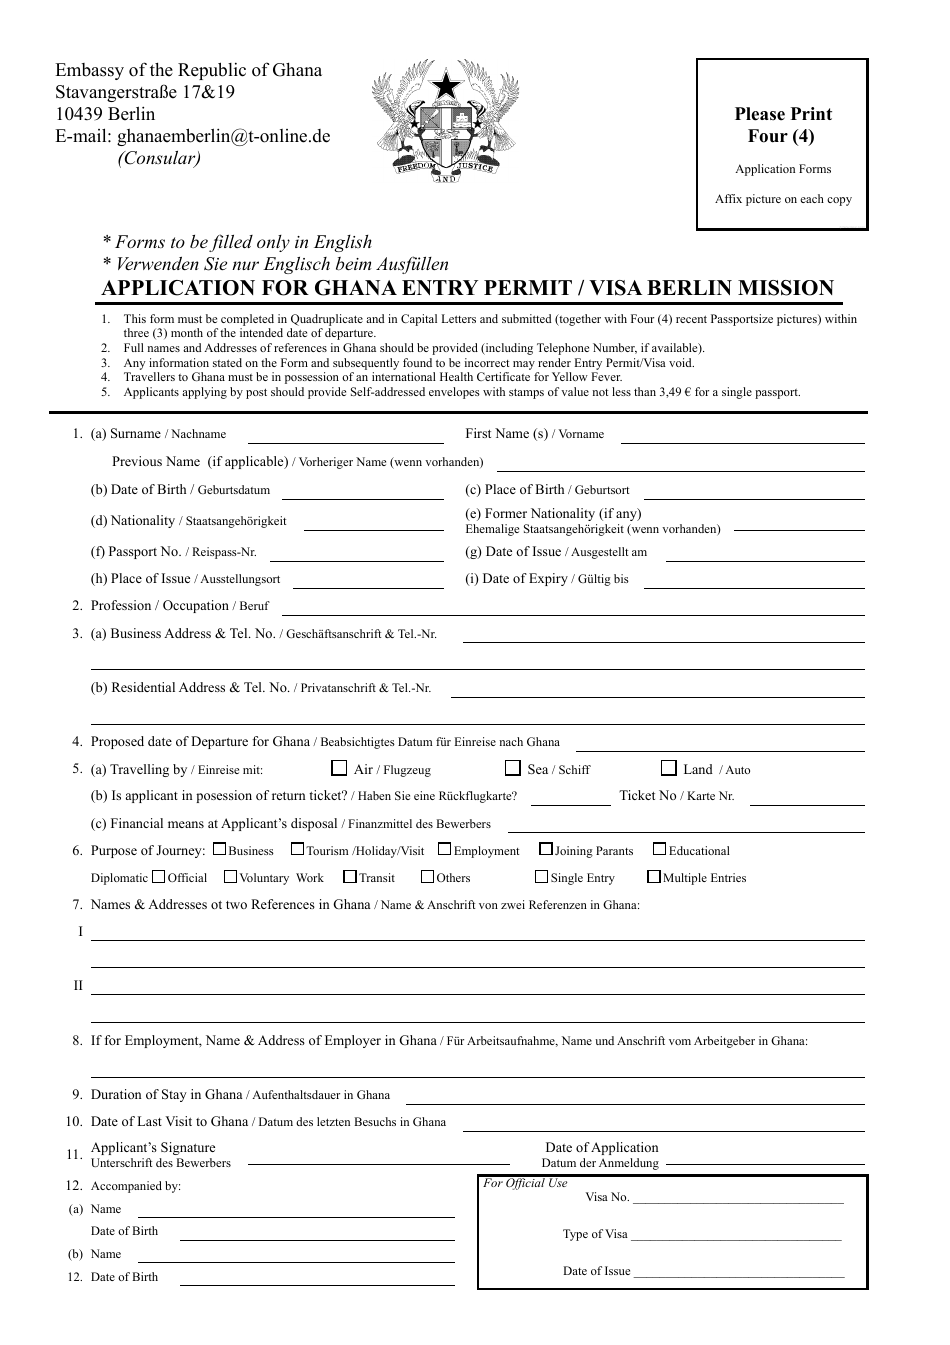 Application for Ghana Entry Permit / Visa Berlin Mission - Embassy of the Republic of Ghana - Berlin, Germany, Page 1